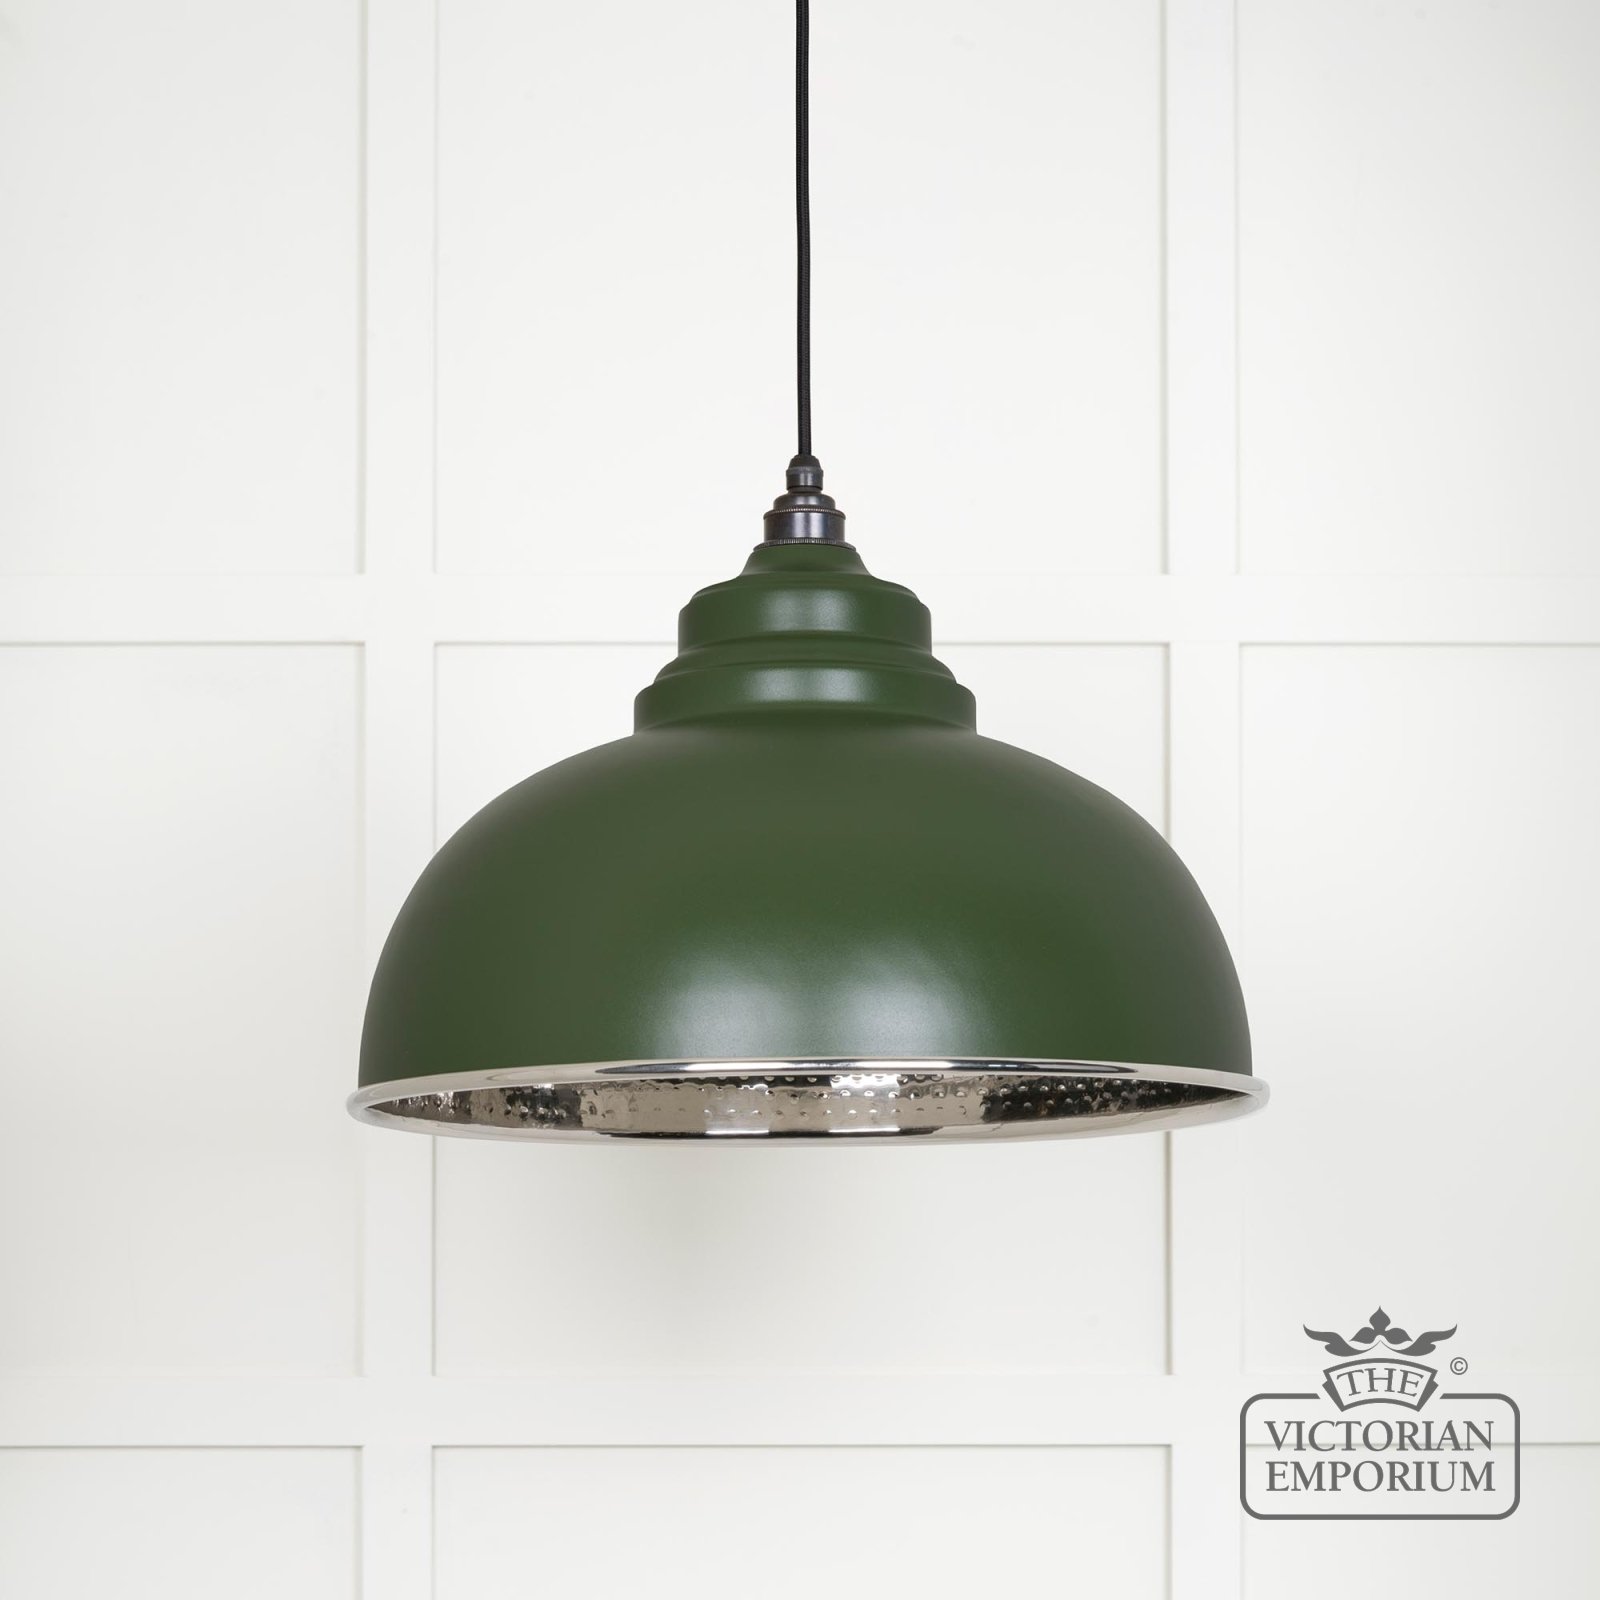 Harlow pendant light in hammered nickel with heath exterior